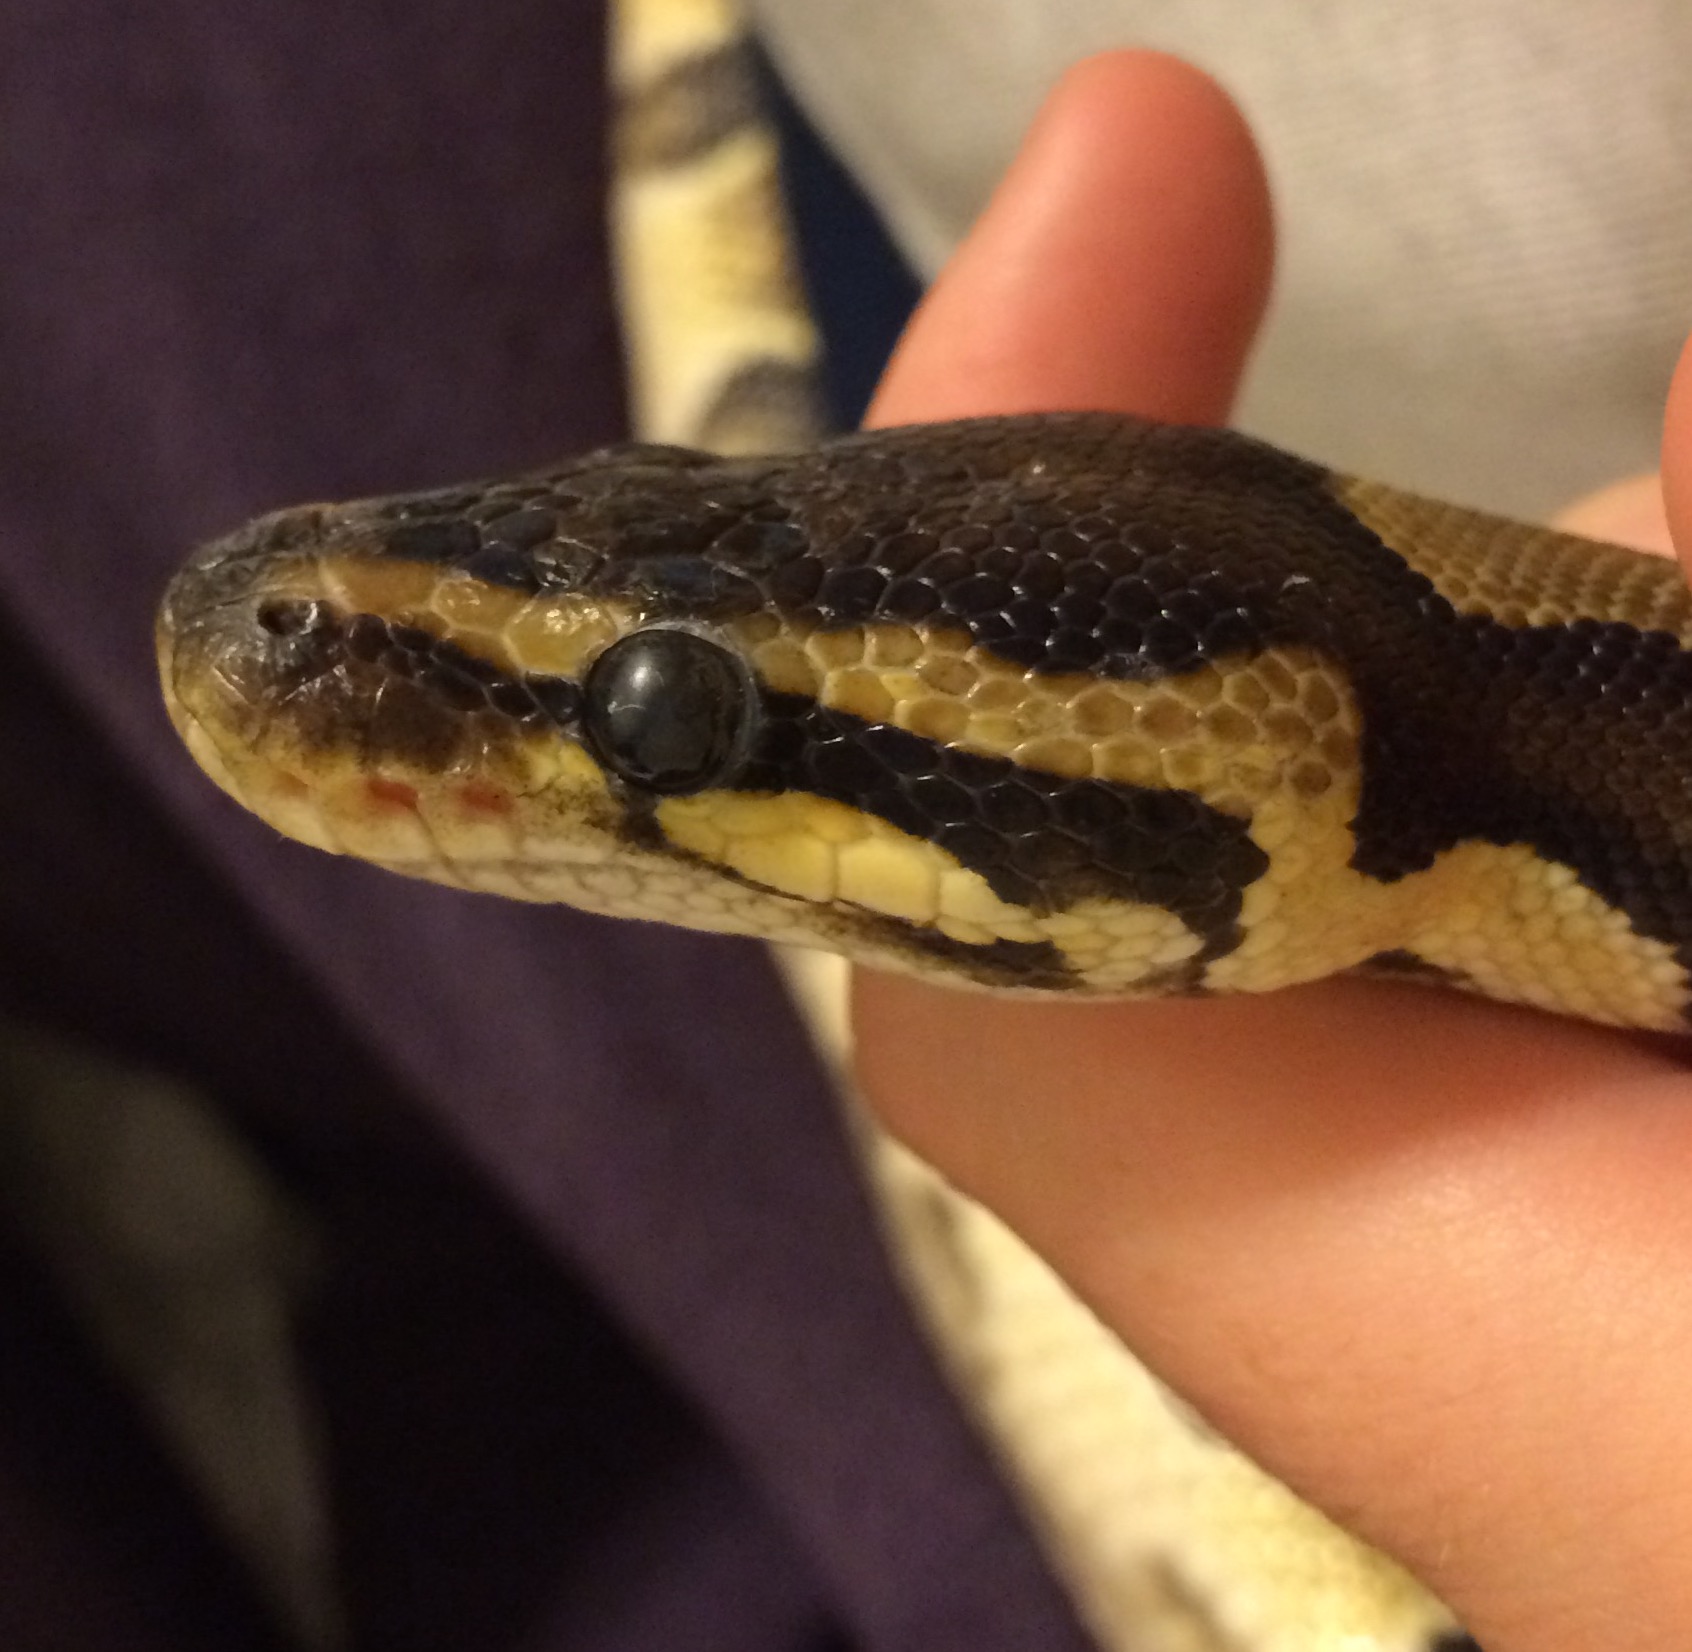 Retained eye caps? How To Get Stuck Shed Off Ball Python Eye